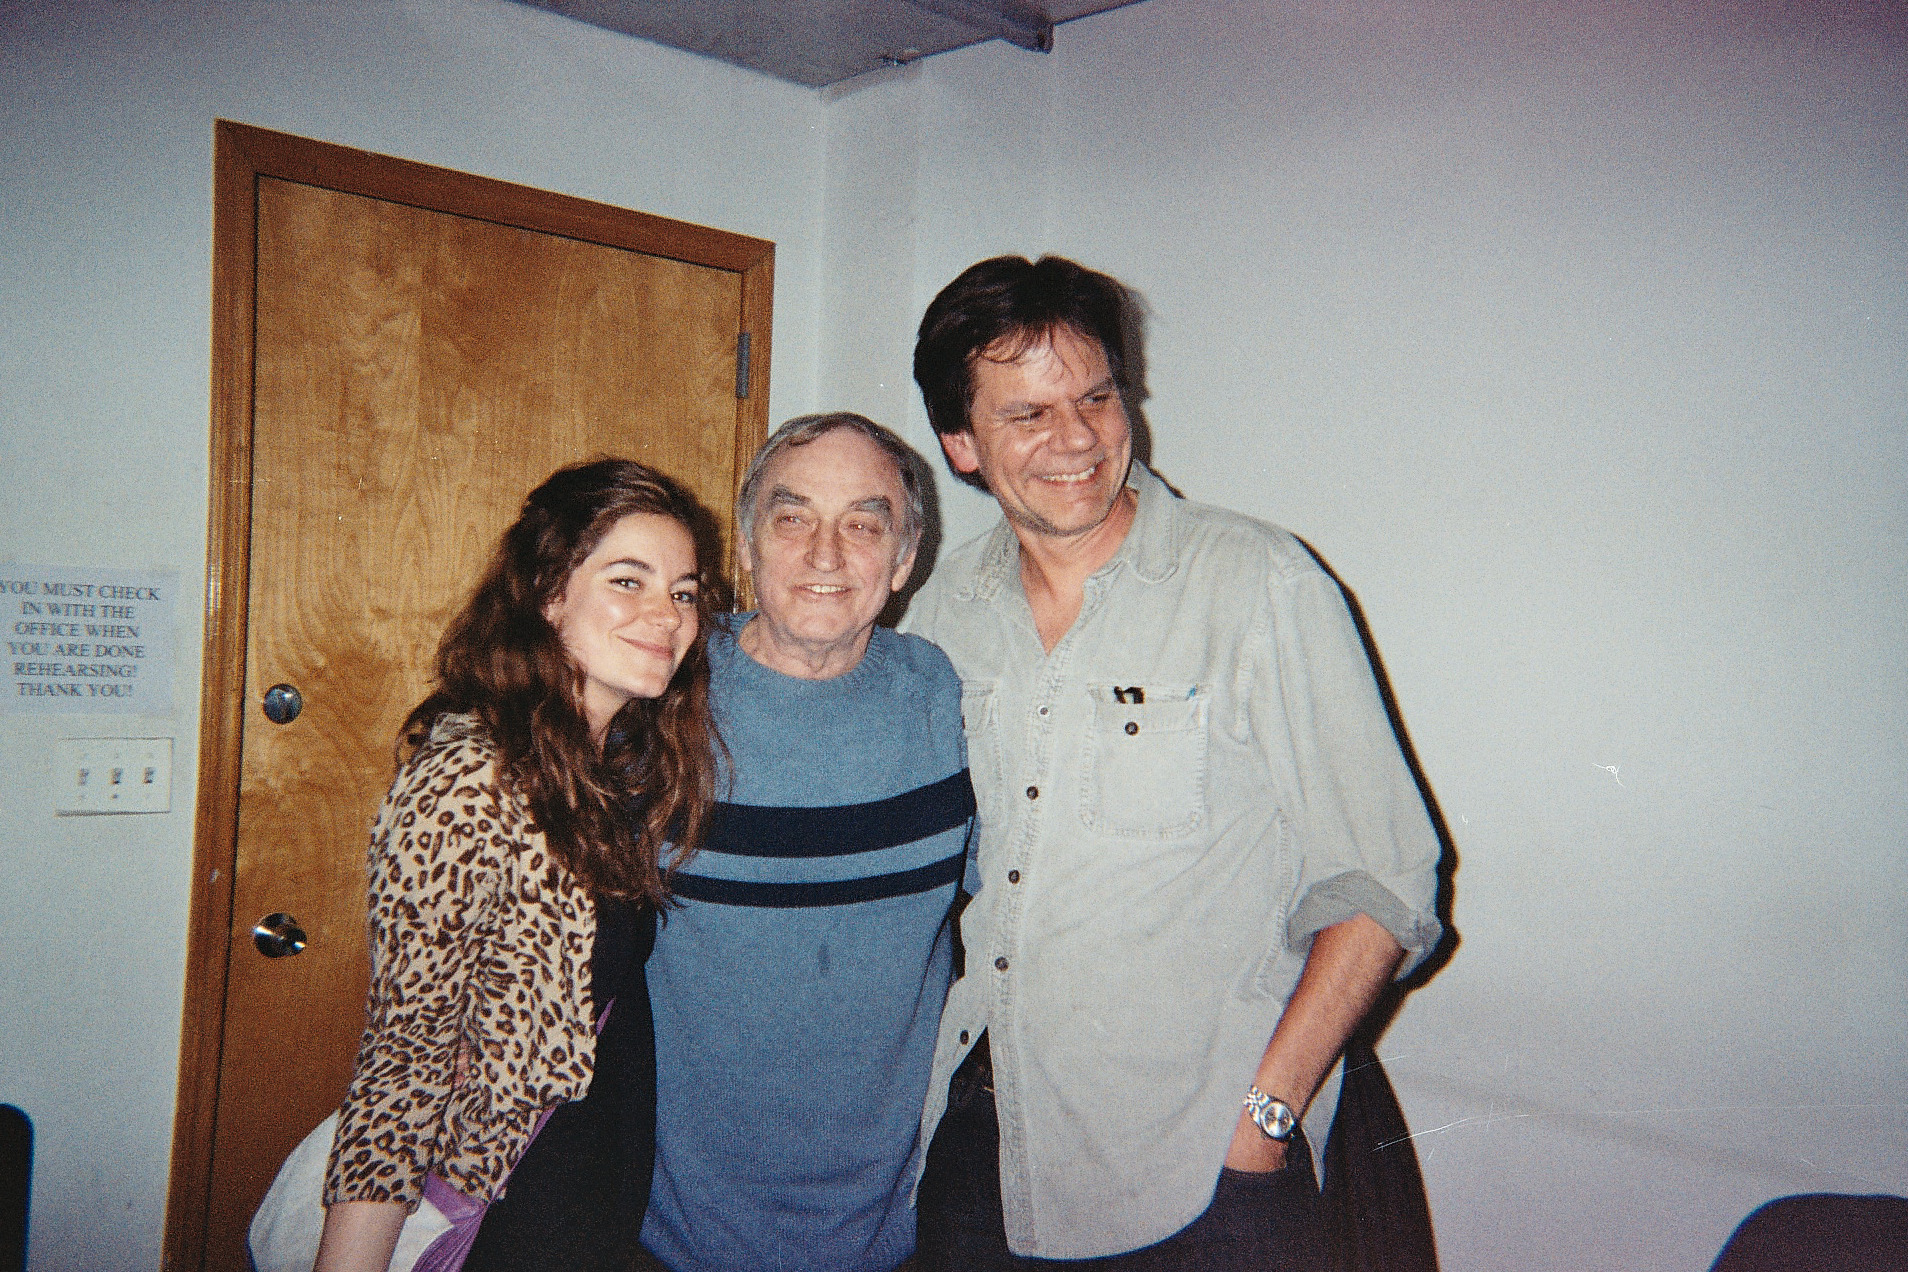 Peter backstage with Lanford Wilson